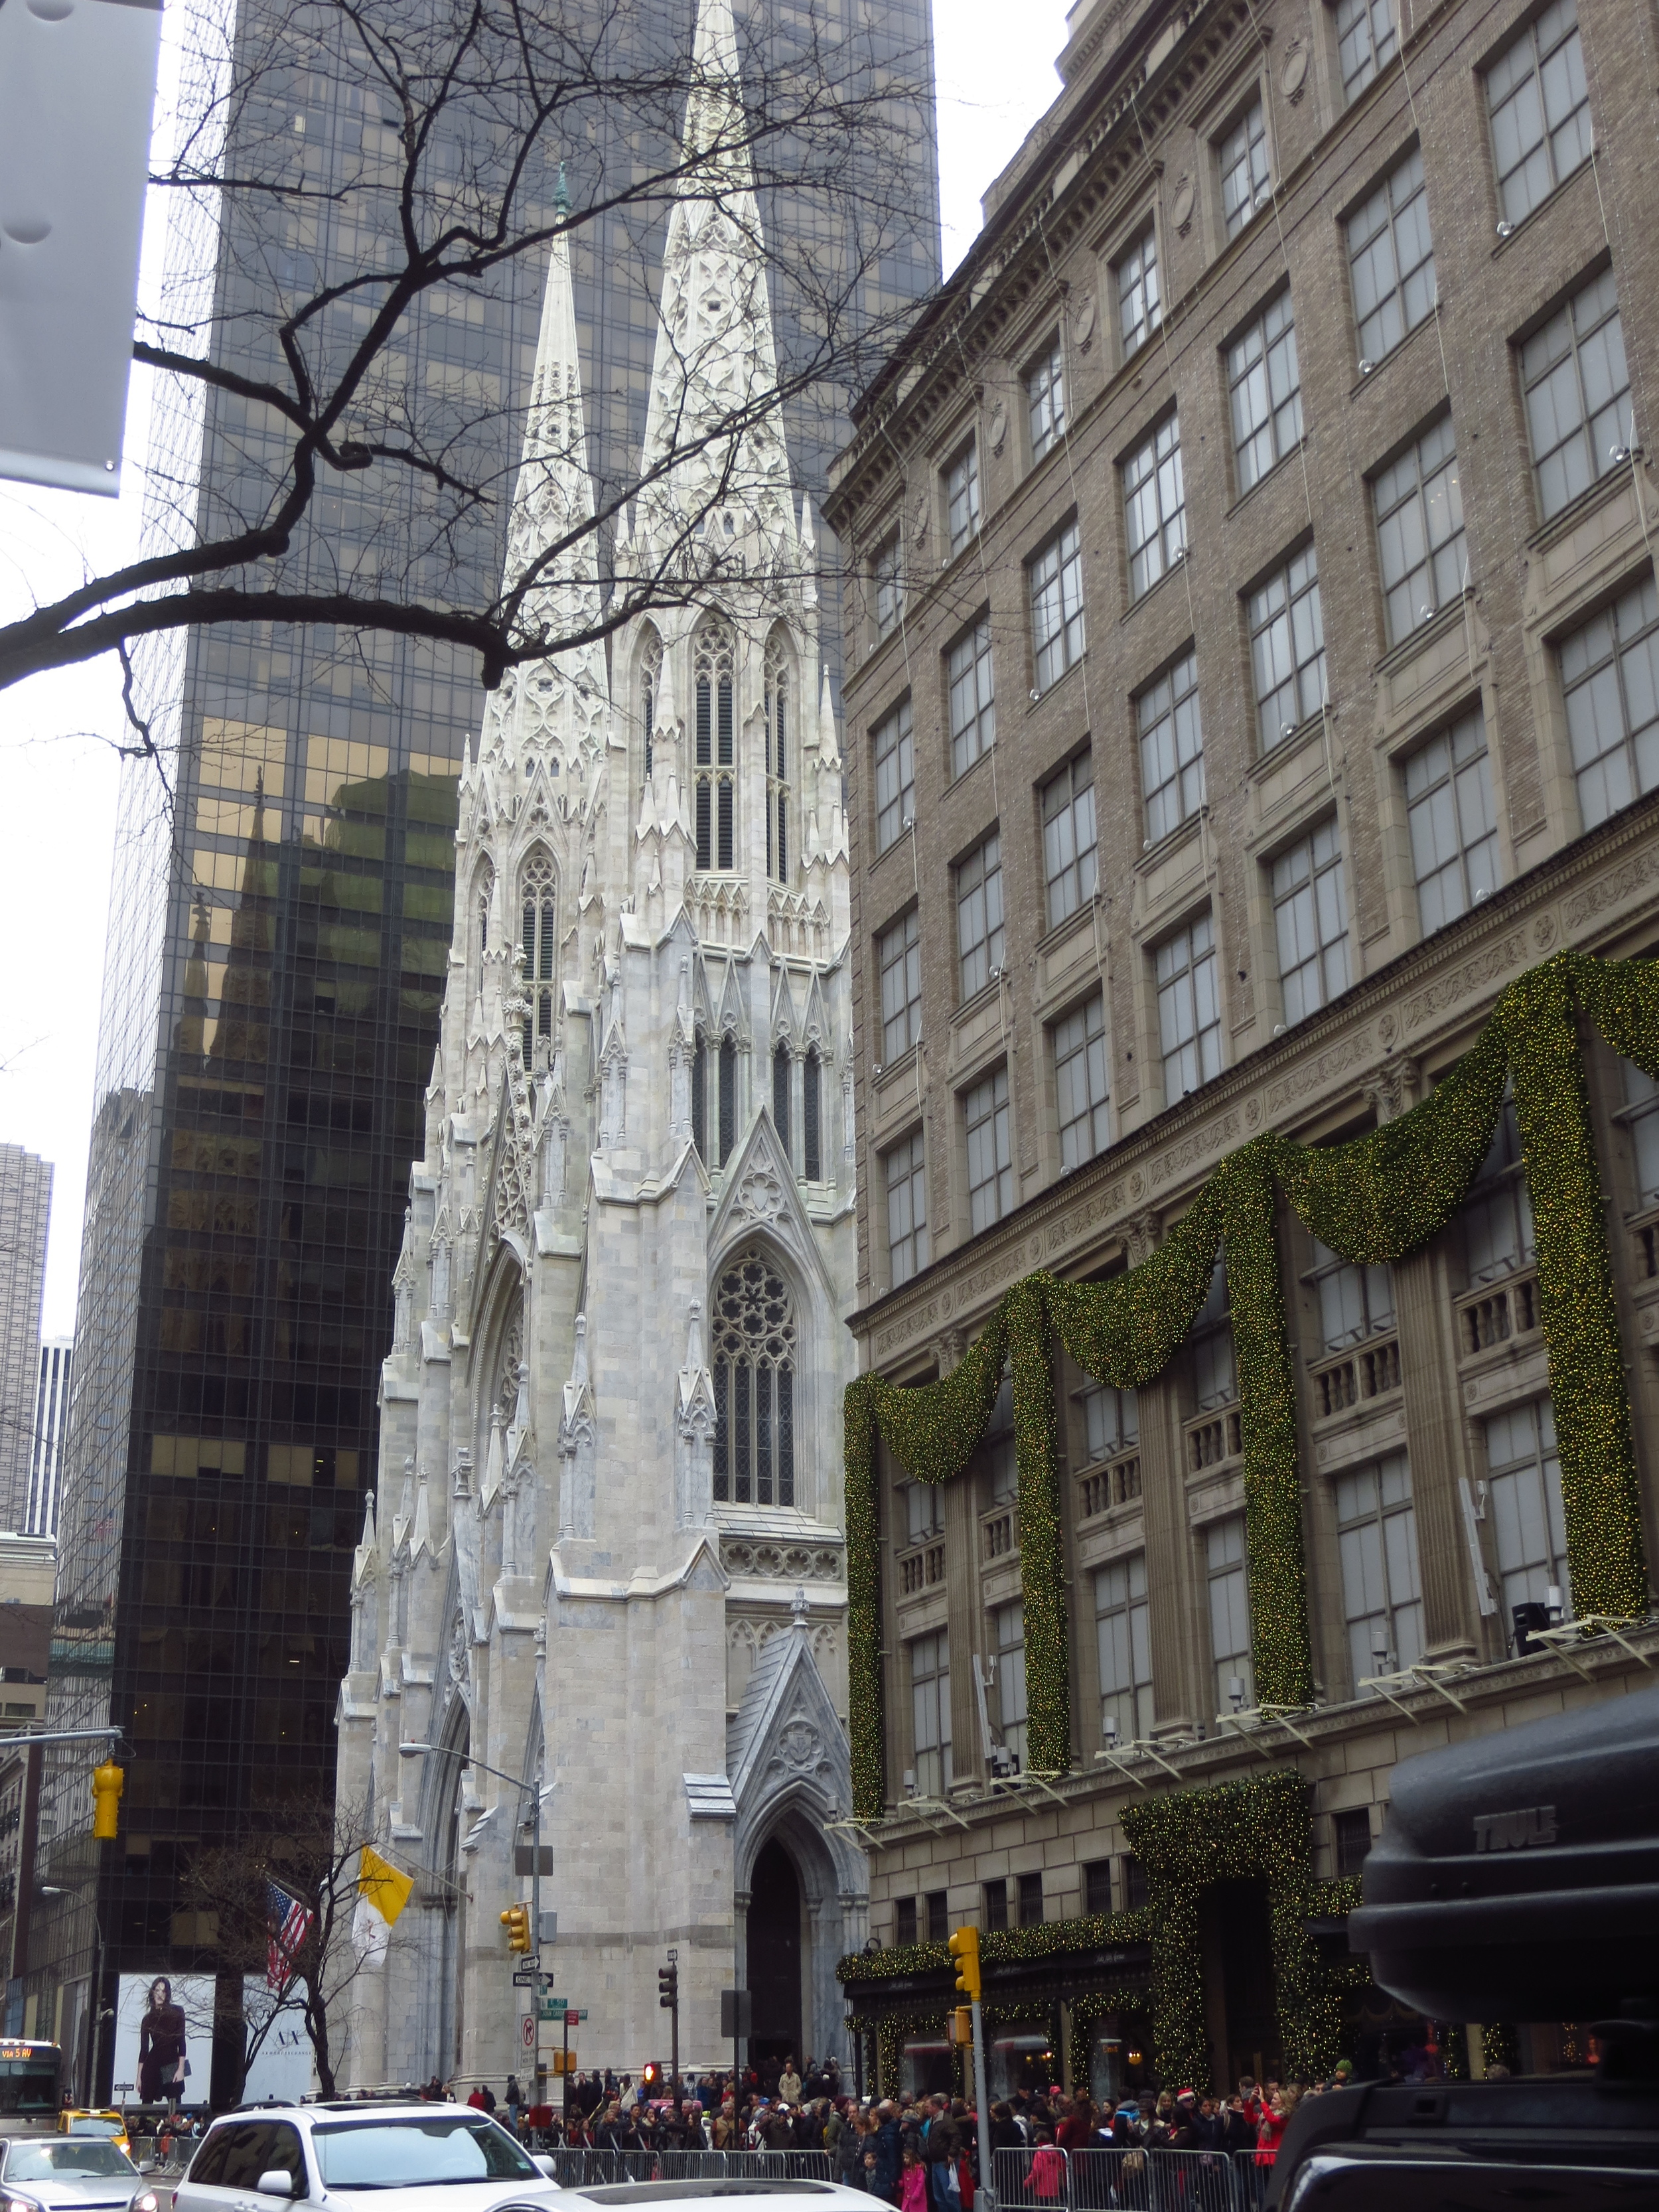 St. Patrick's Cathedral and Sak's